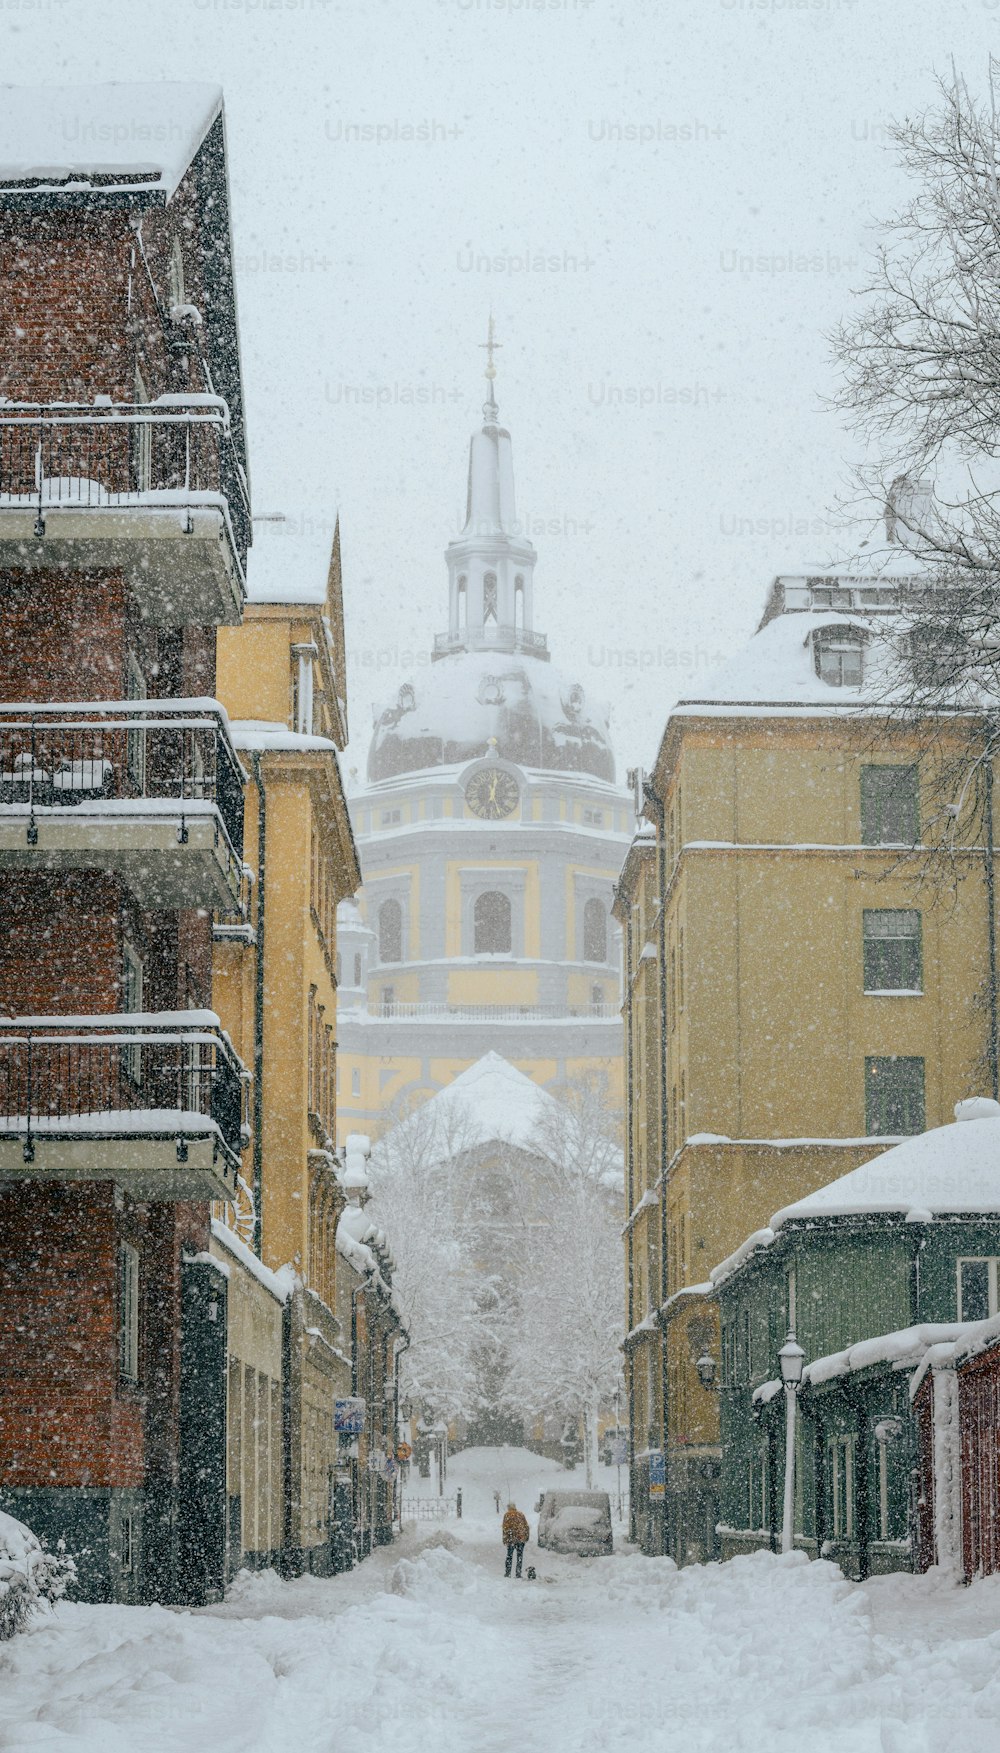 a snowy street with buildings and a tower in the distance